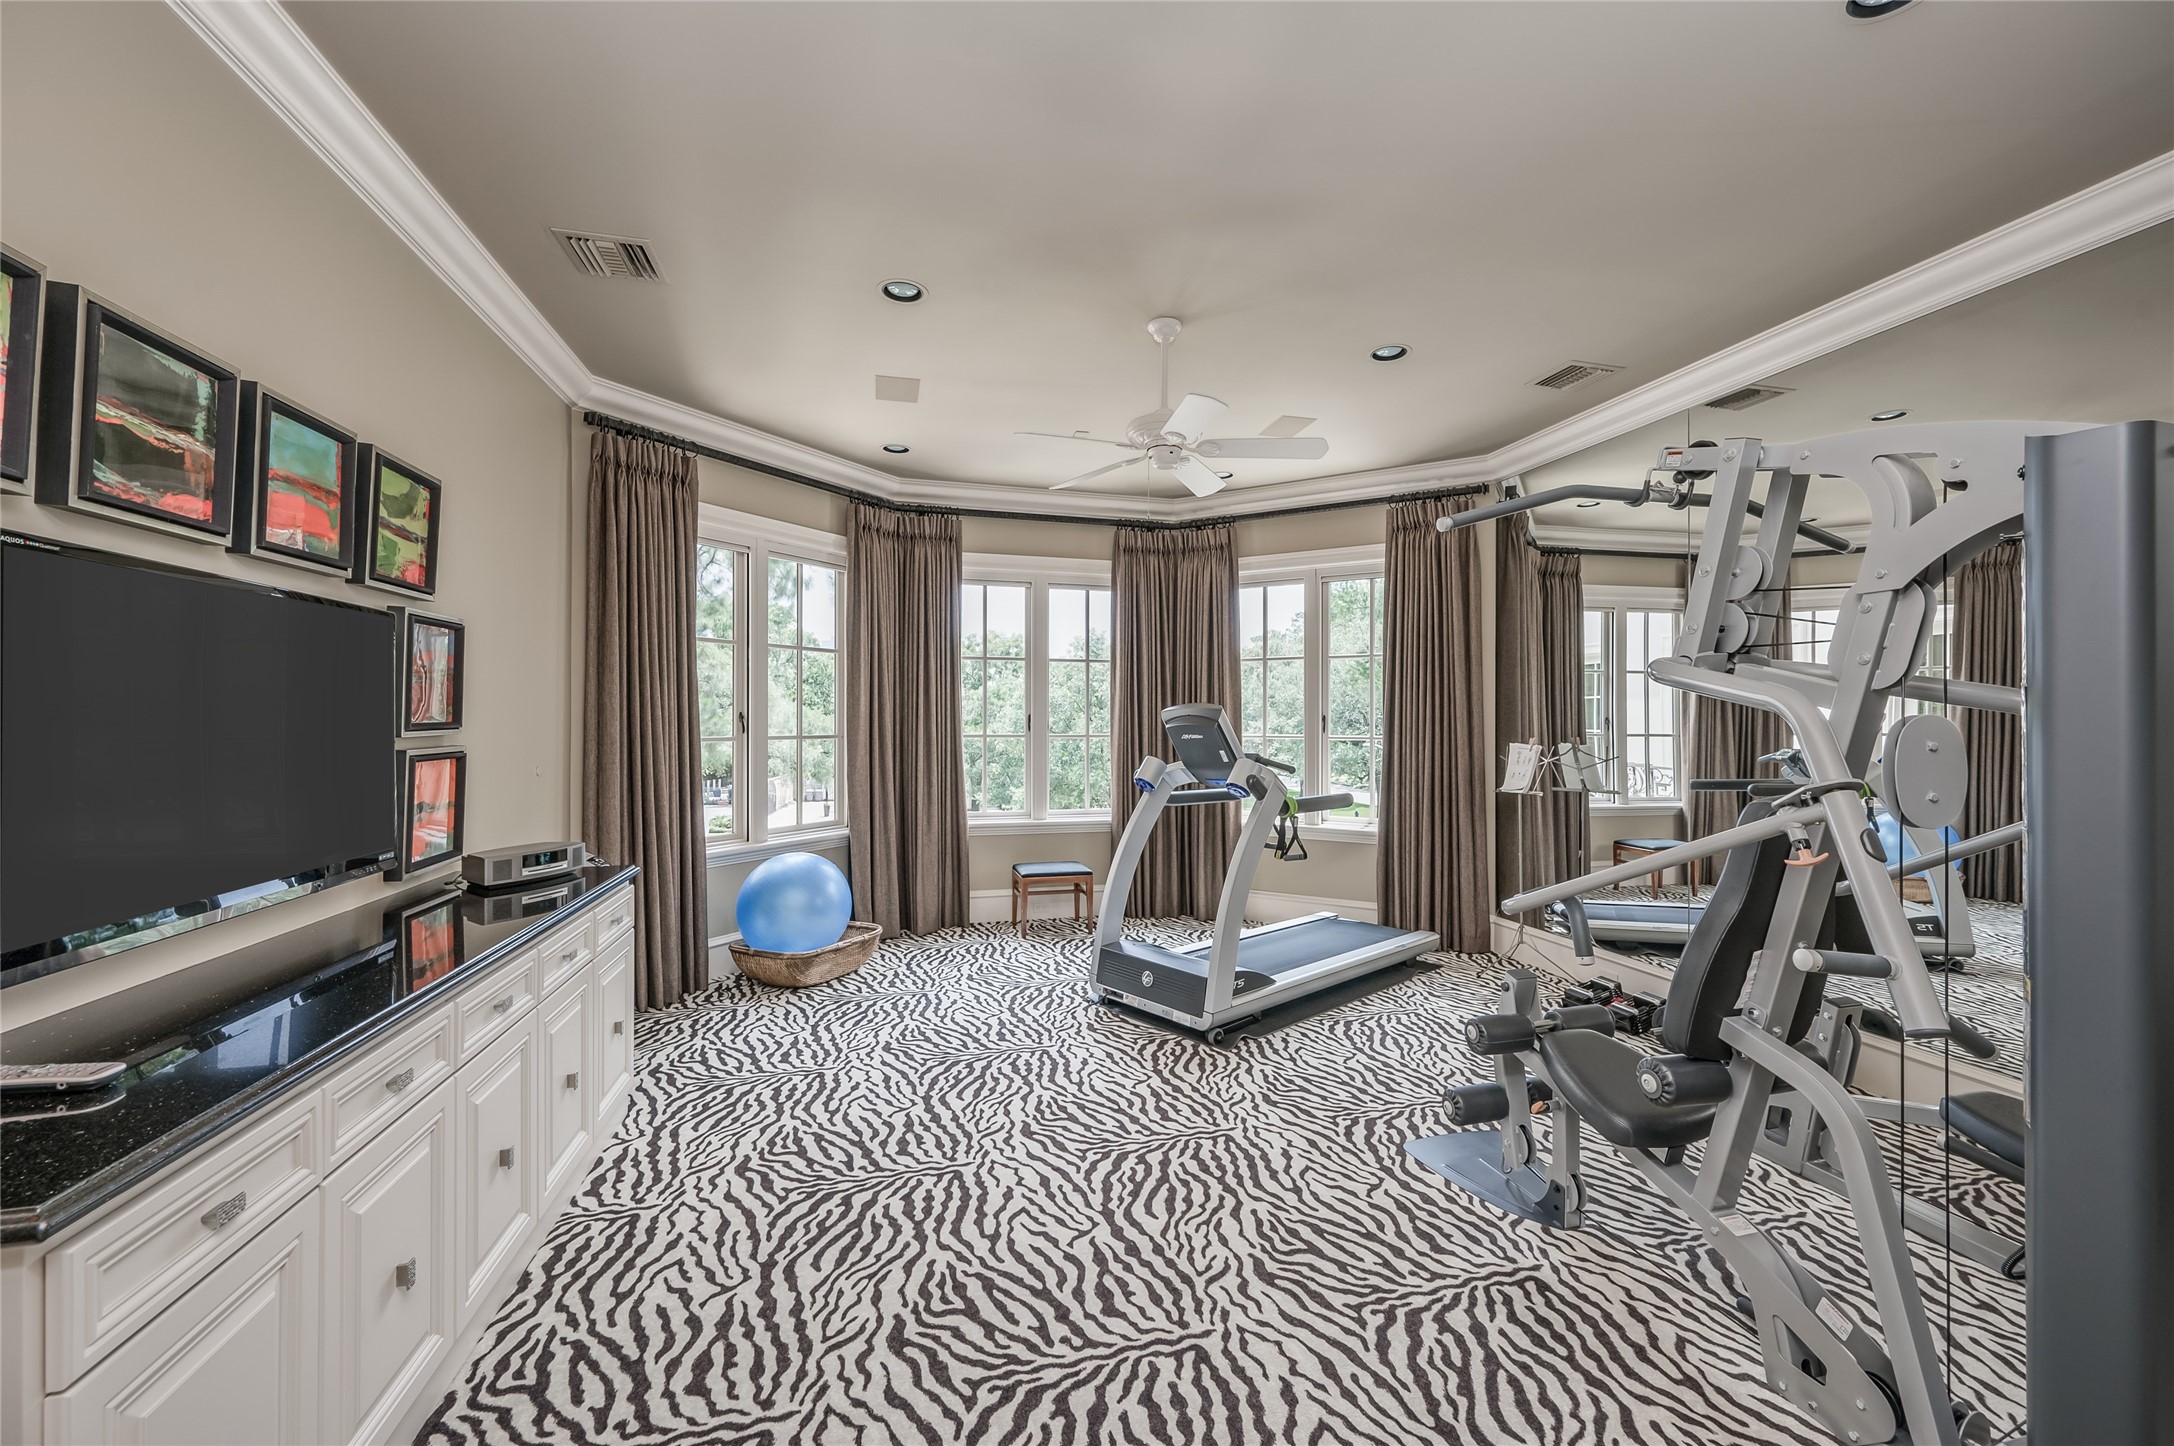 [Gym]
Black-out drapes, a media cabinet, and mirrored wall complete the gym.t